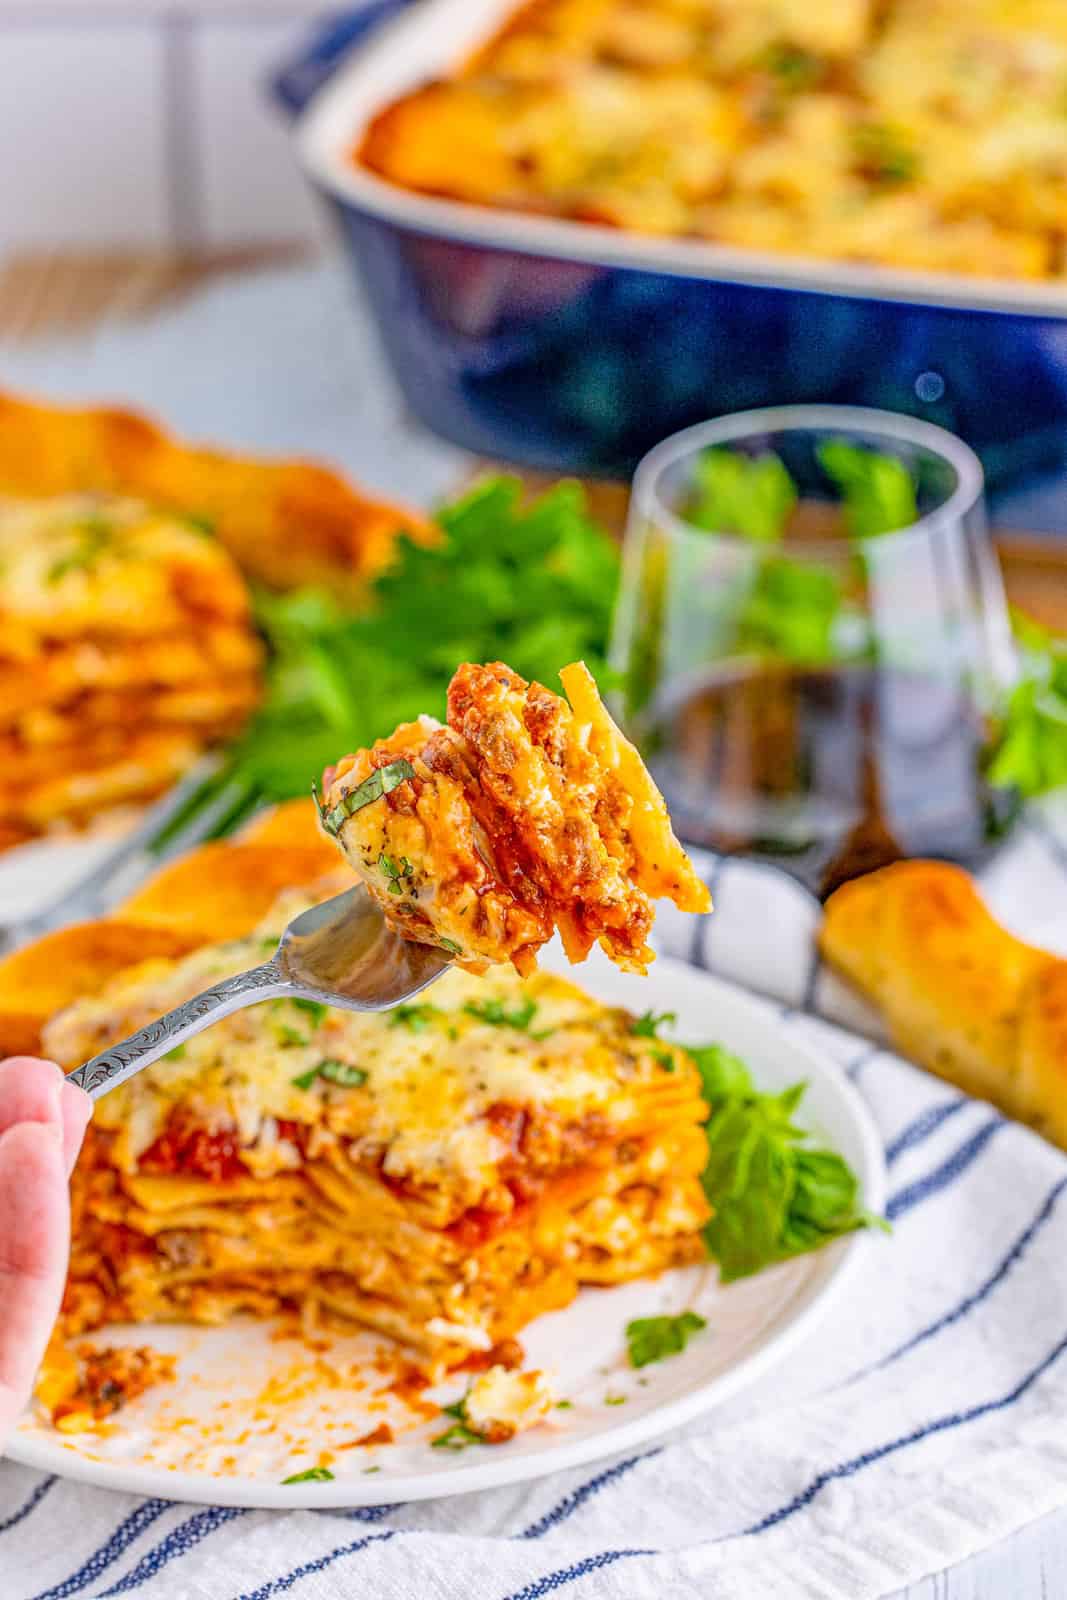 Fork holding up a bite out of the lasagna.